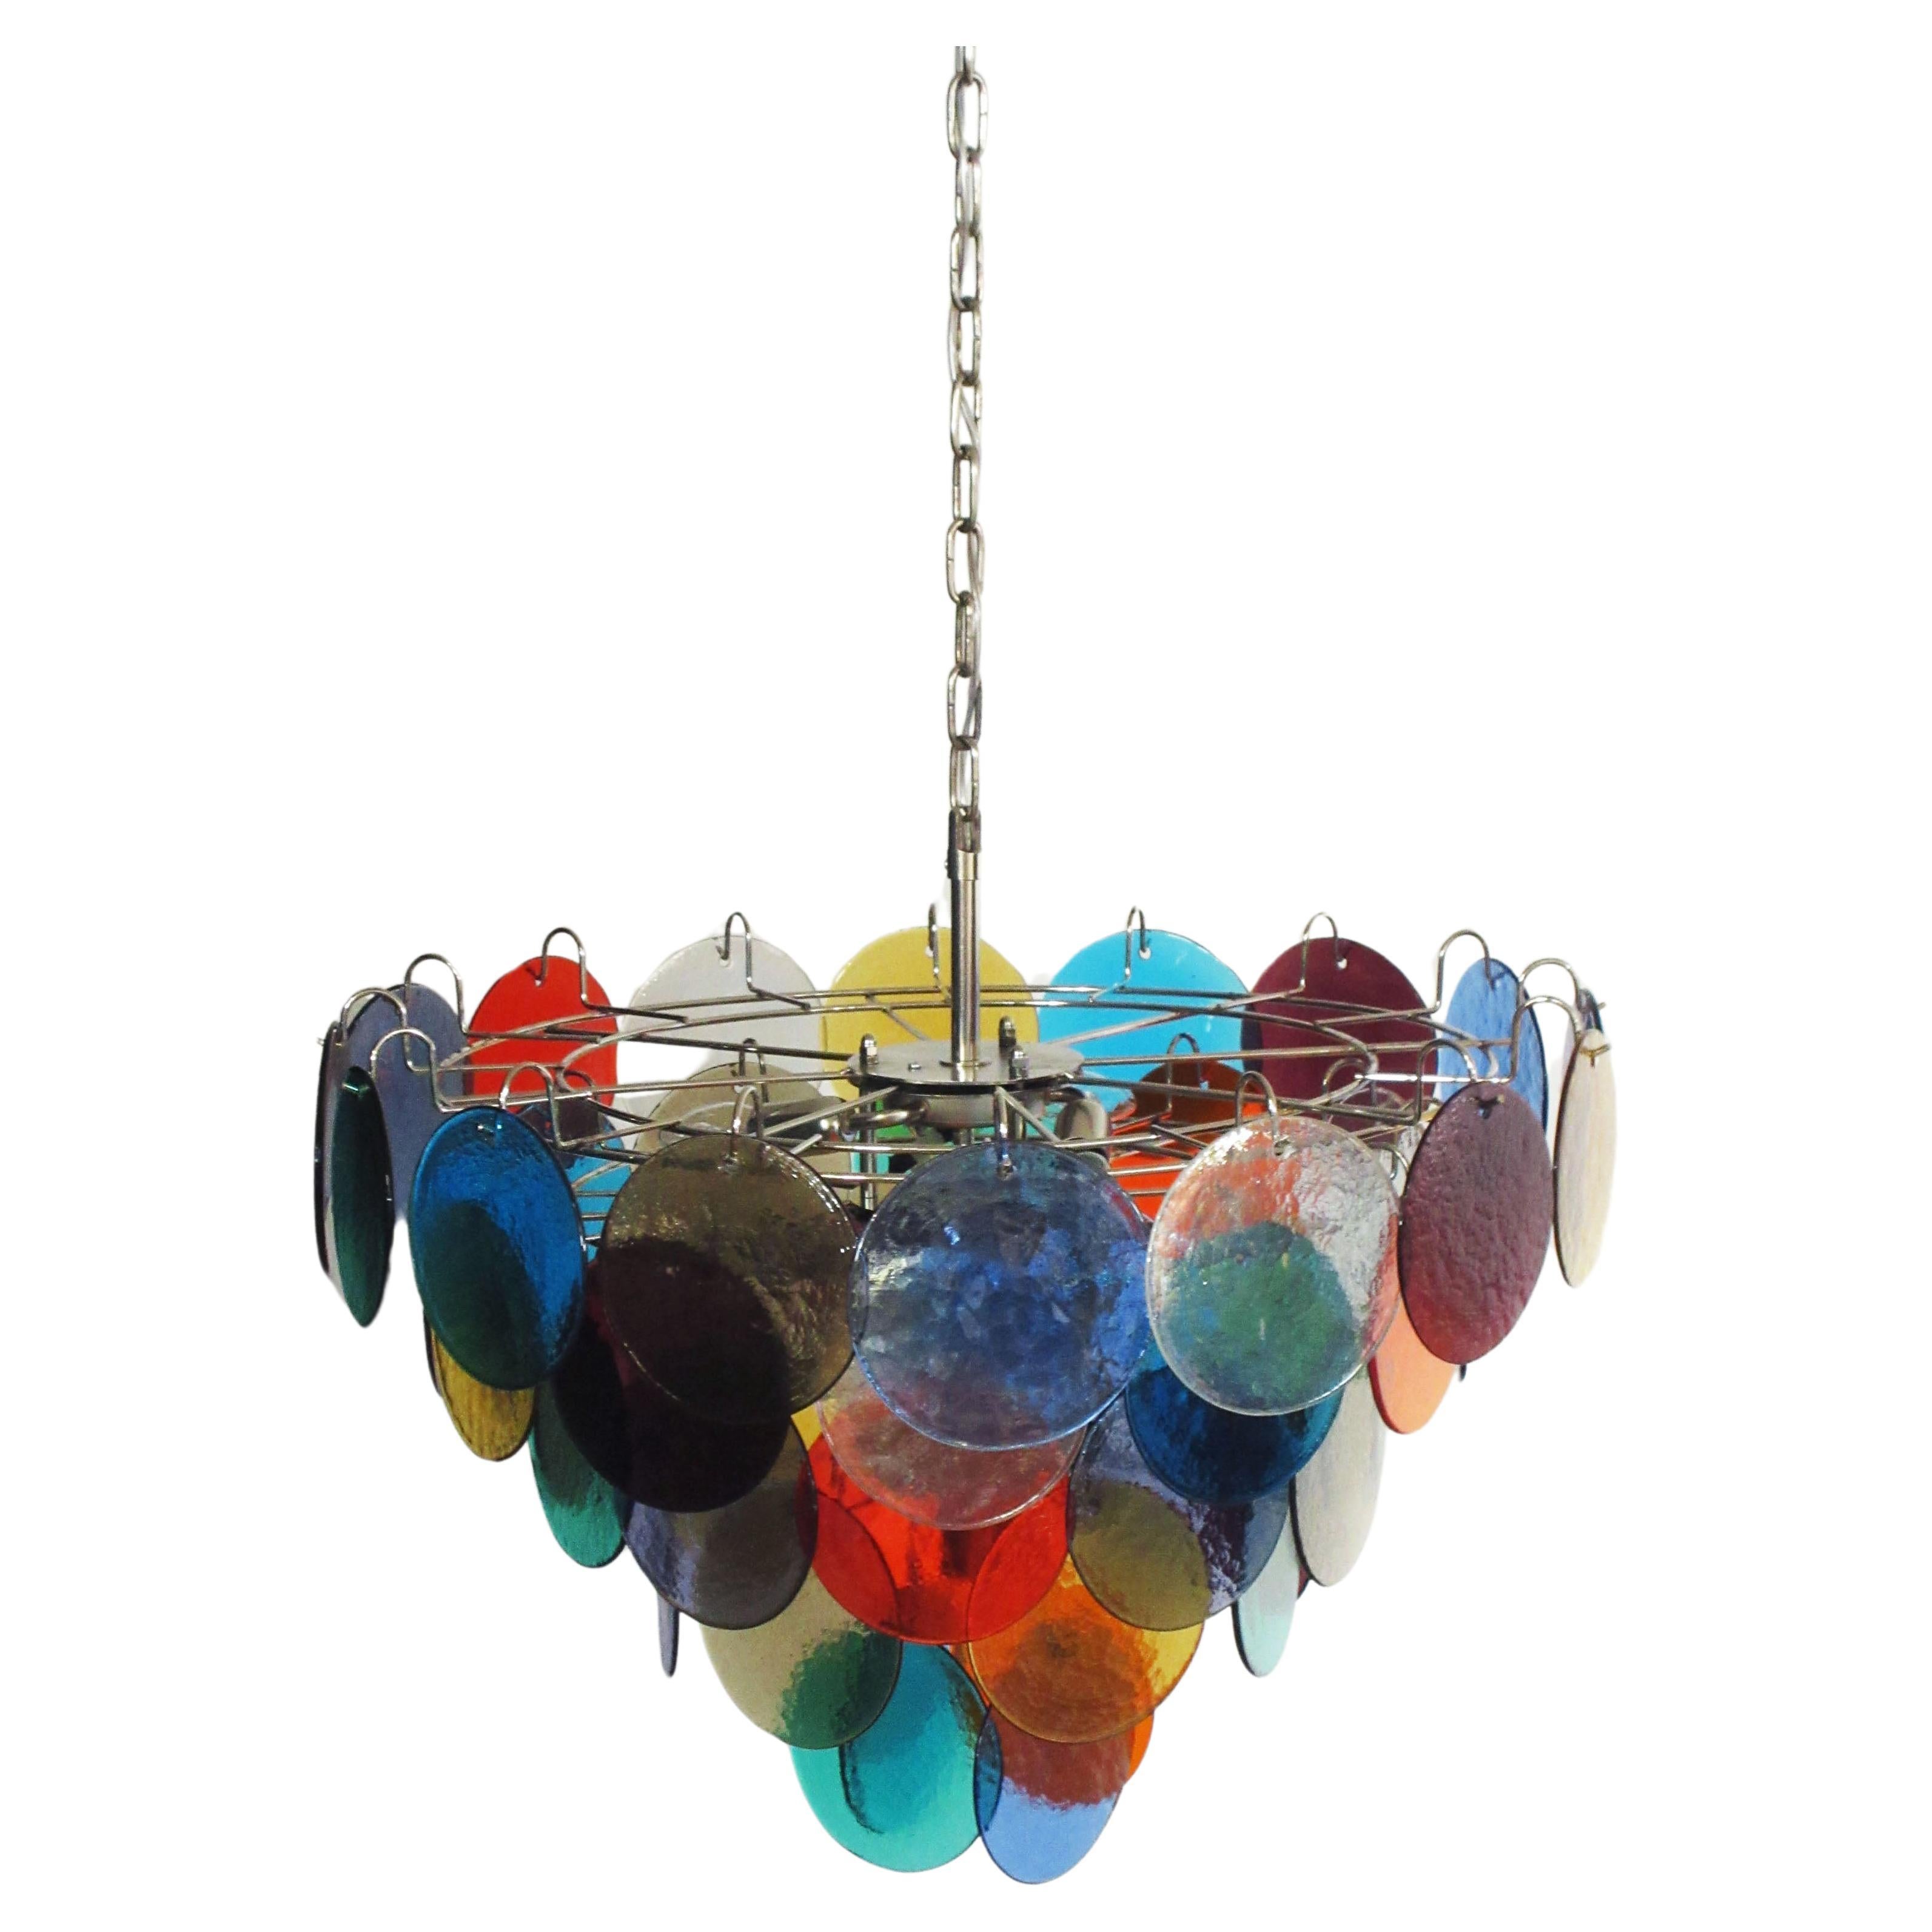 Each chandelier has 50 Murano multicolored glass disks. The glasses are now unavailable, they have the particularity of reflecting a multiplicity of colors, which makes the chandelier a true work of art. Nickel metal frame.
Period: